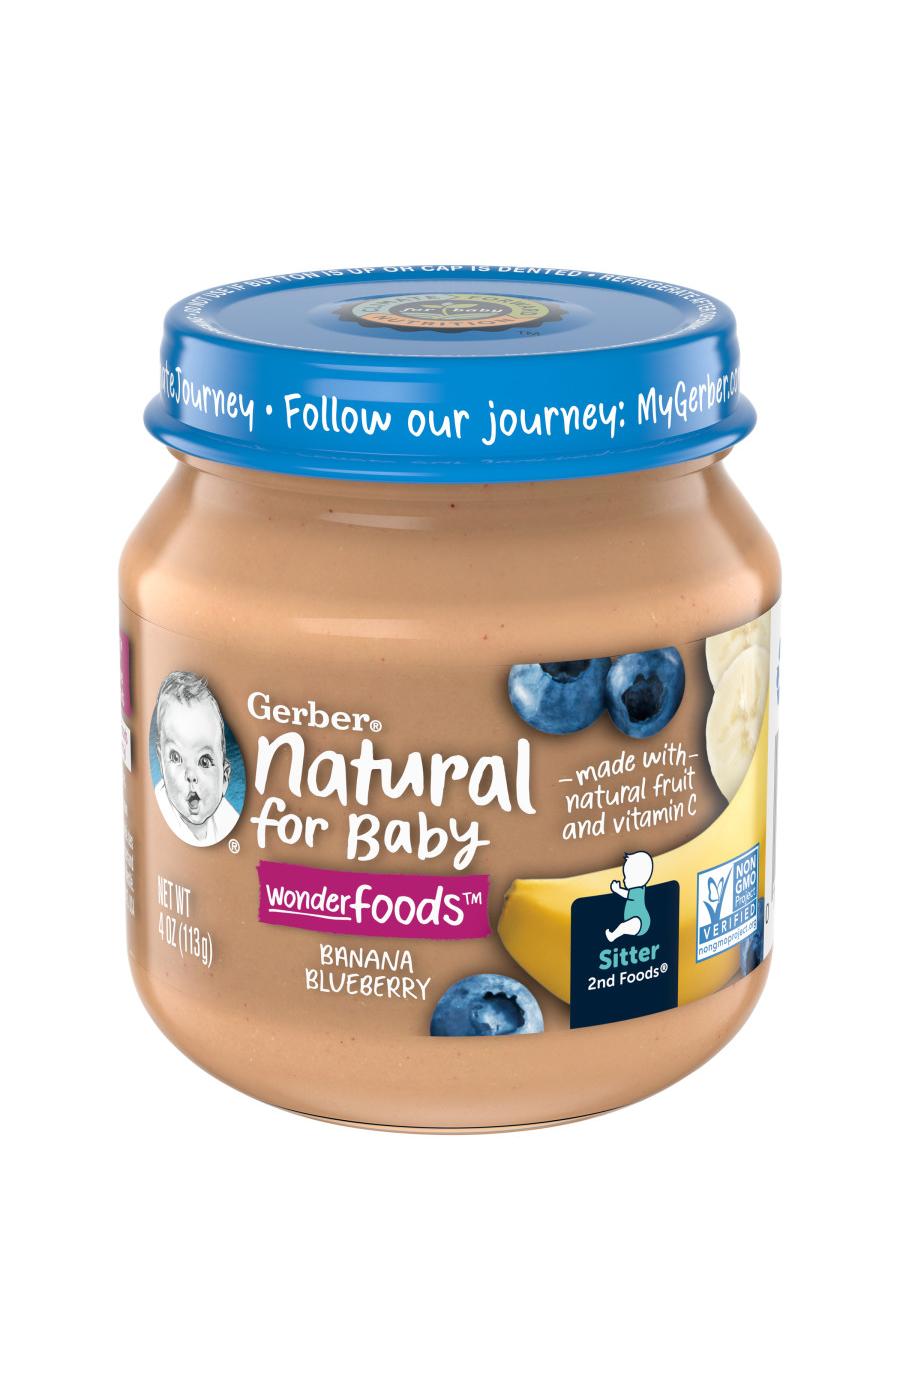 Gerber Natural for Baby Wonderfoods 2nd Foods - Banana & Blueberry; image 1 of 8